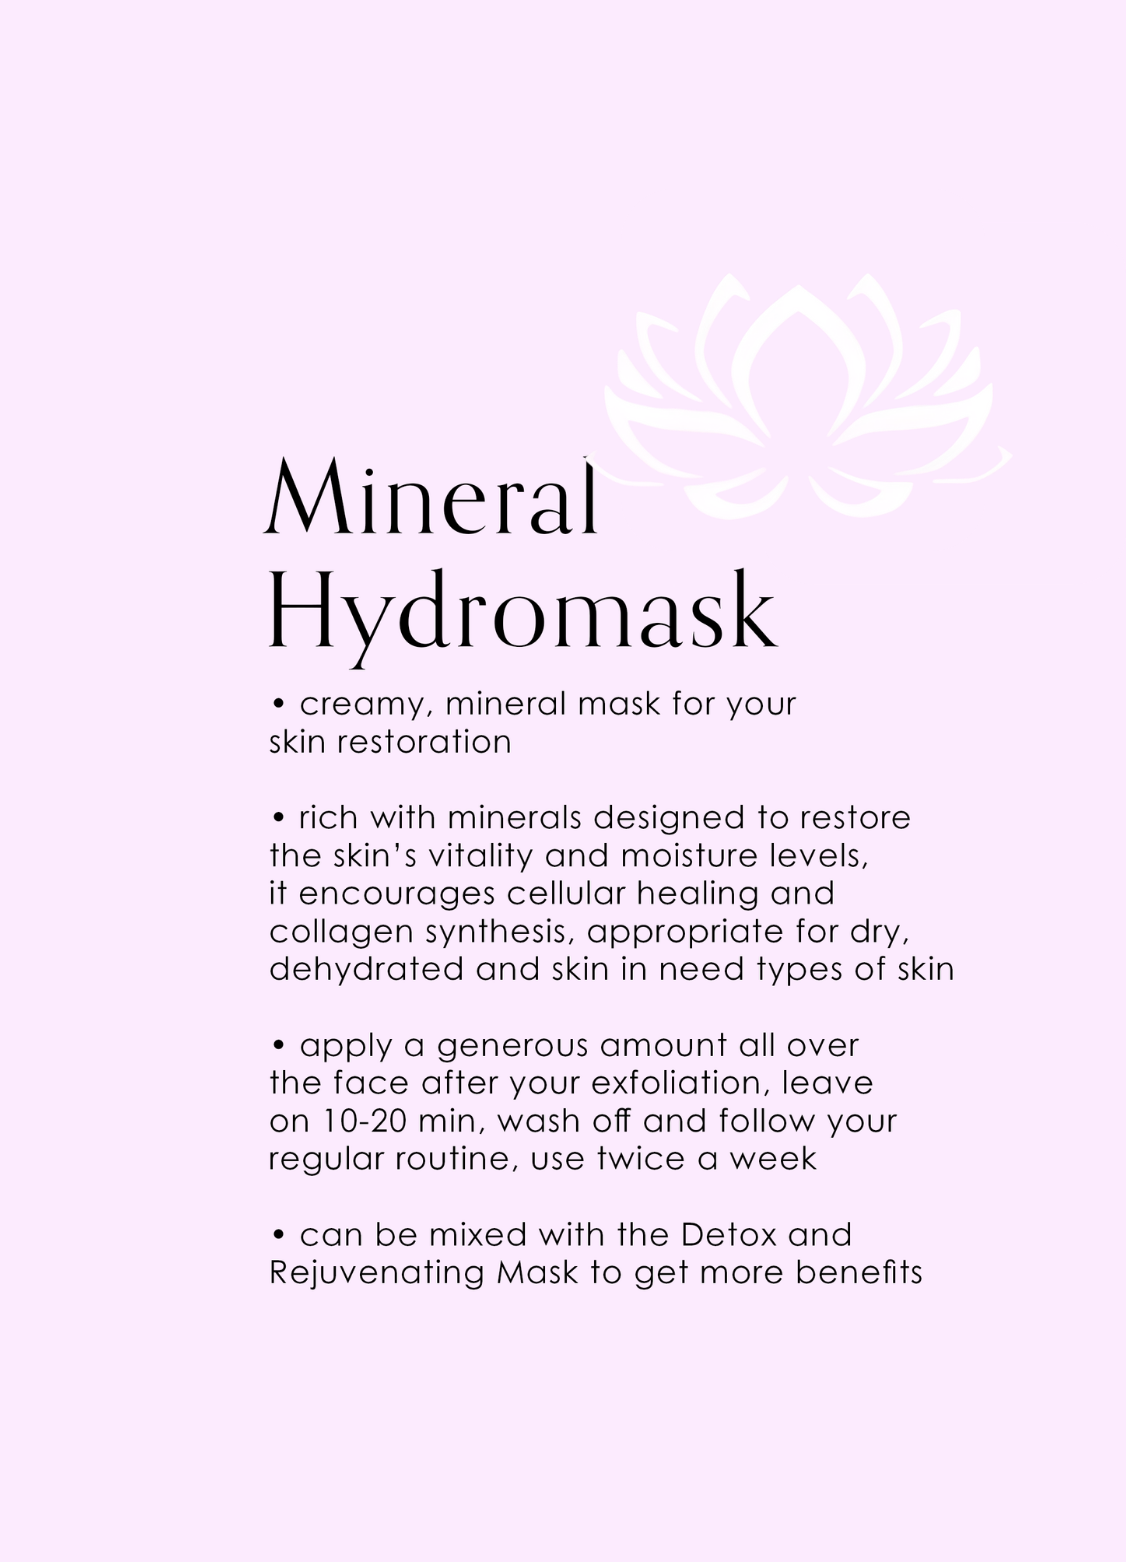 Mineral Hydromask